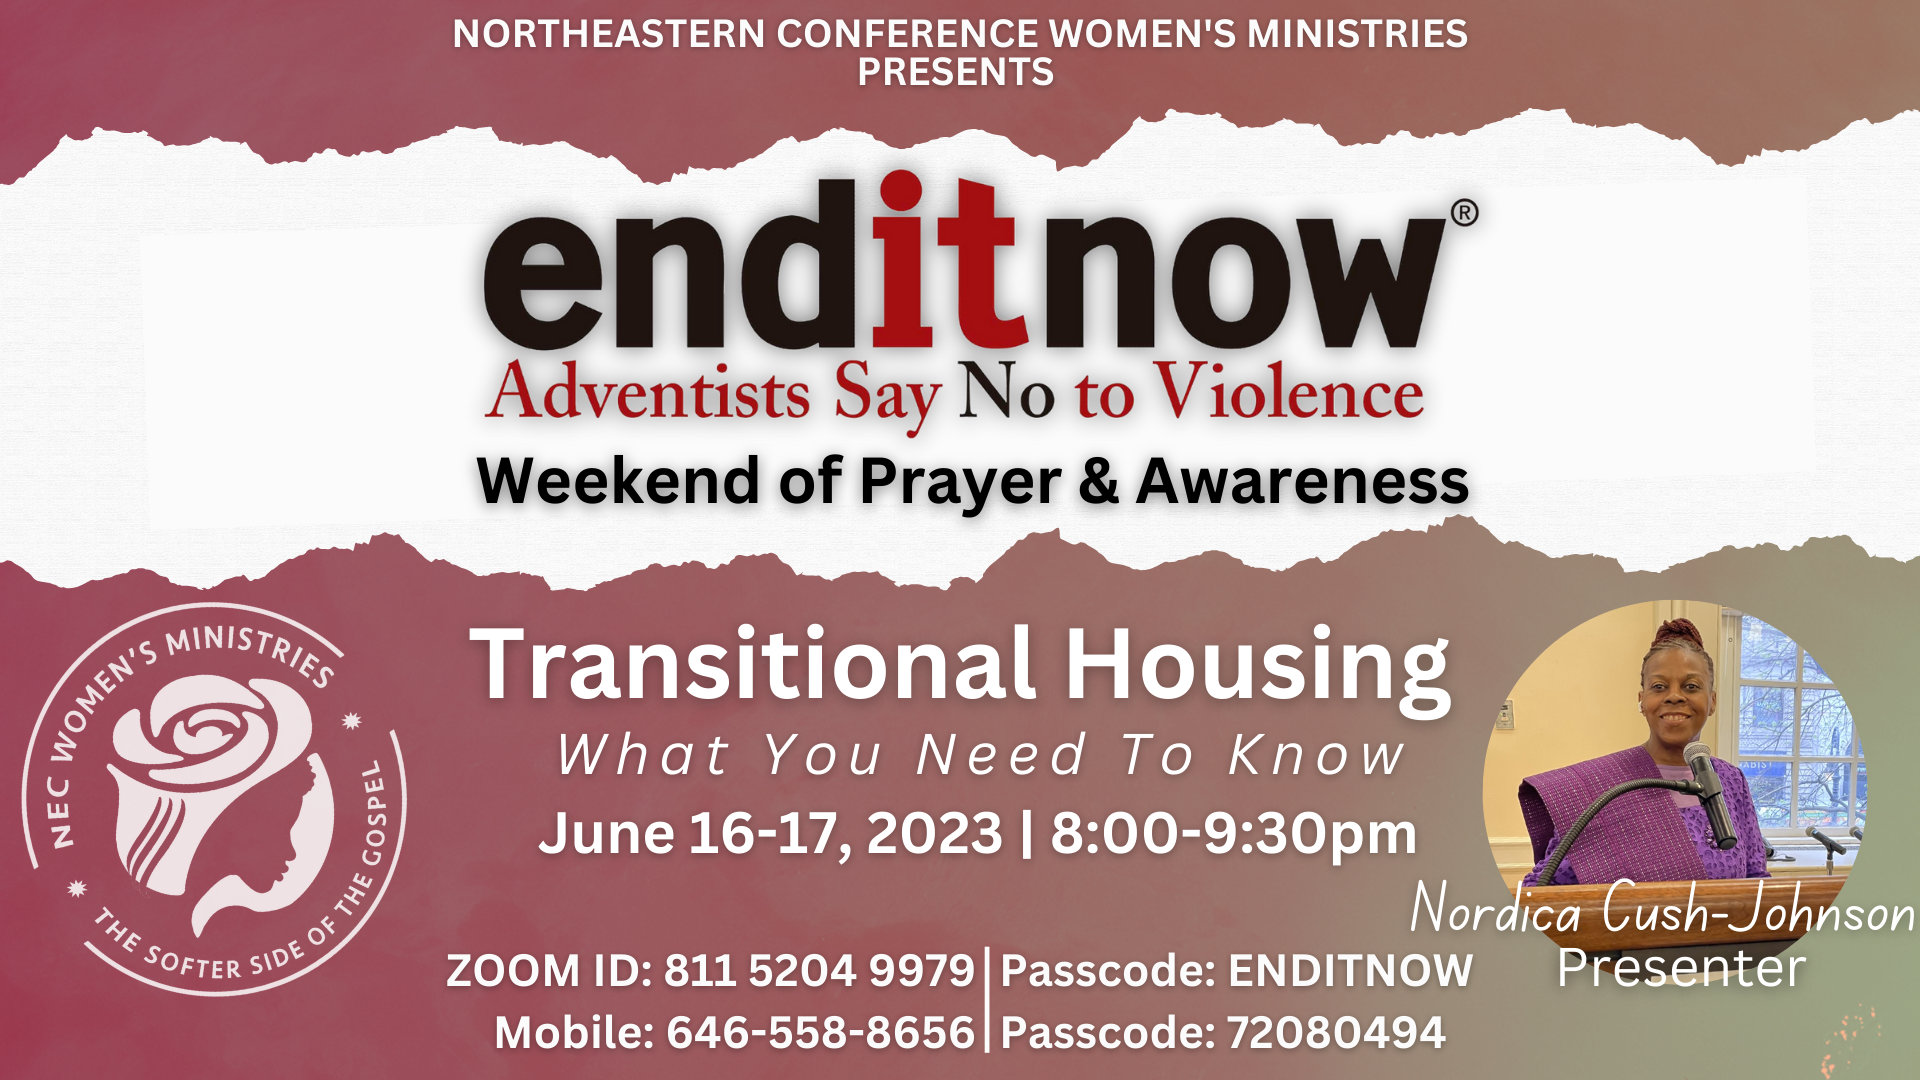 End It Now Weekend of Prayer & Awareness Northeastern Conference of